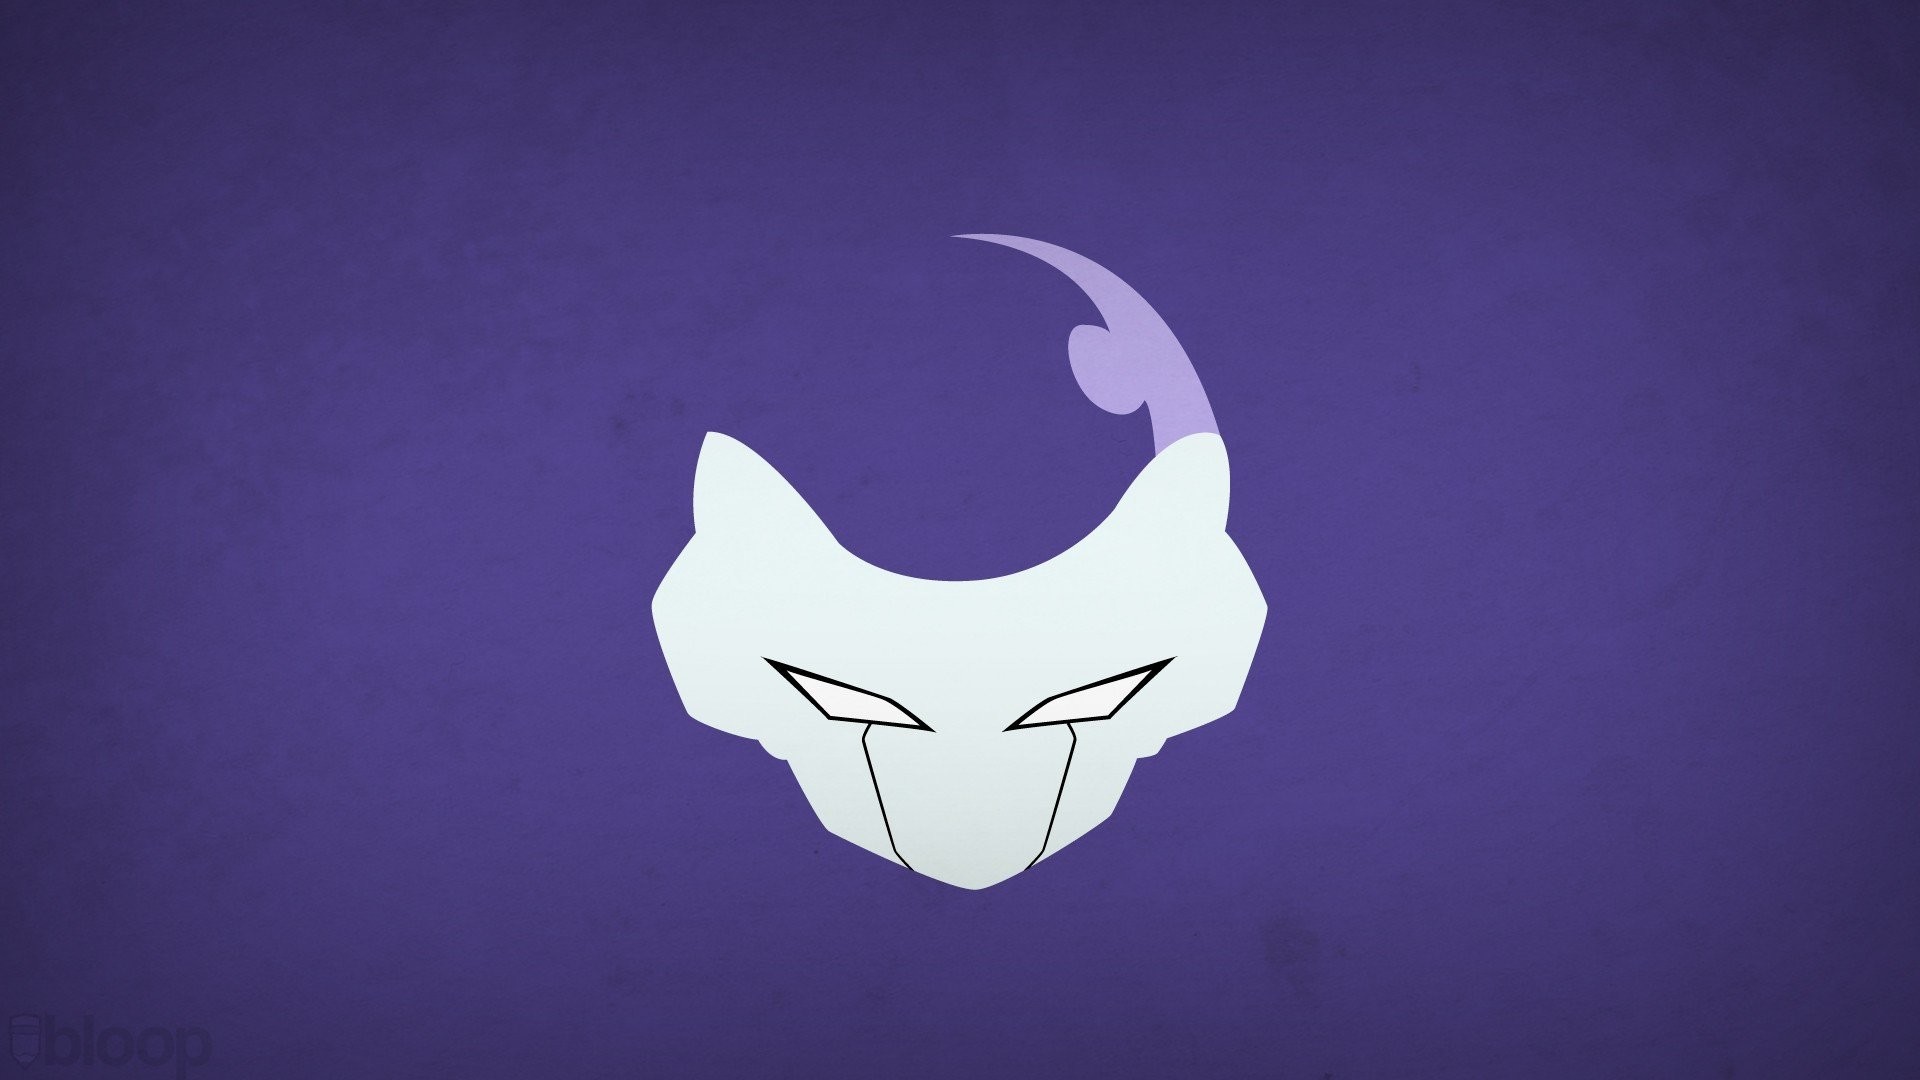 Minimalism Dragon Ball Frieza Superheroes free iPhone or Android Full HD  wallpaper.